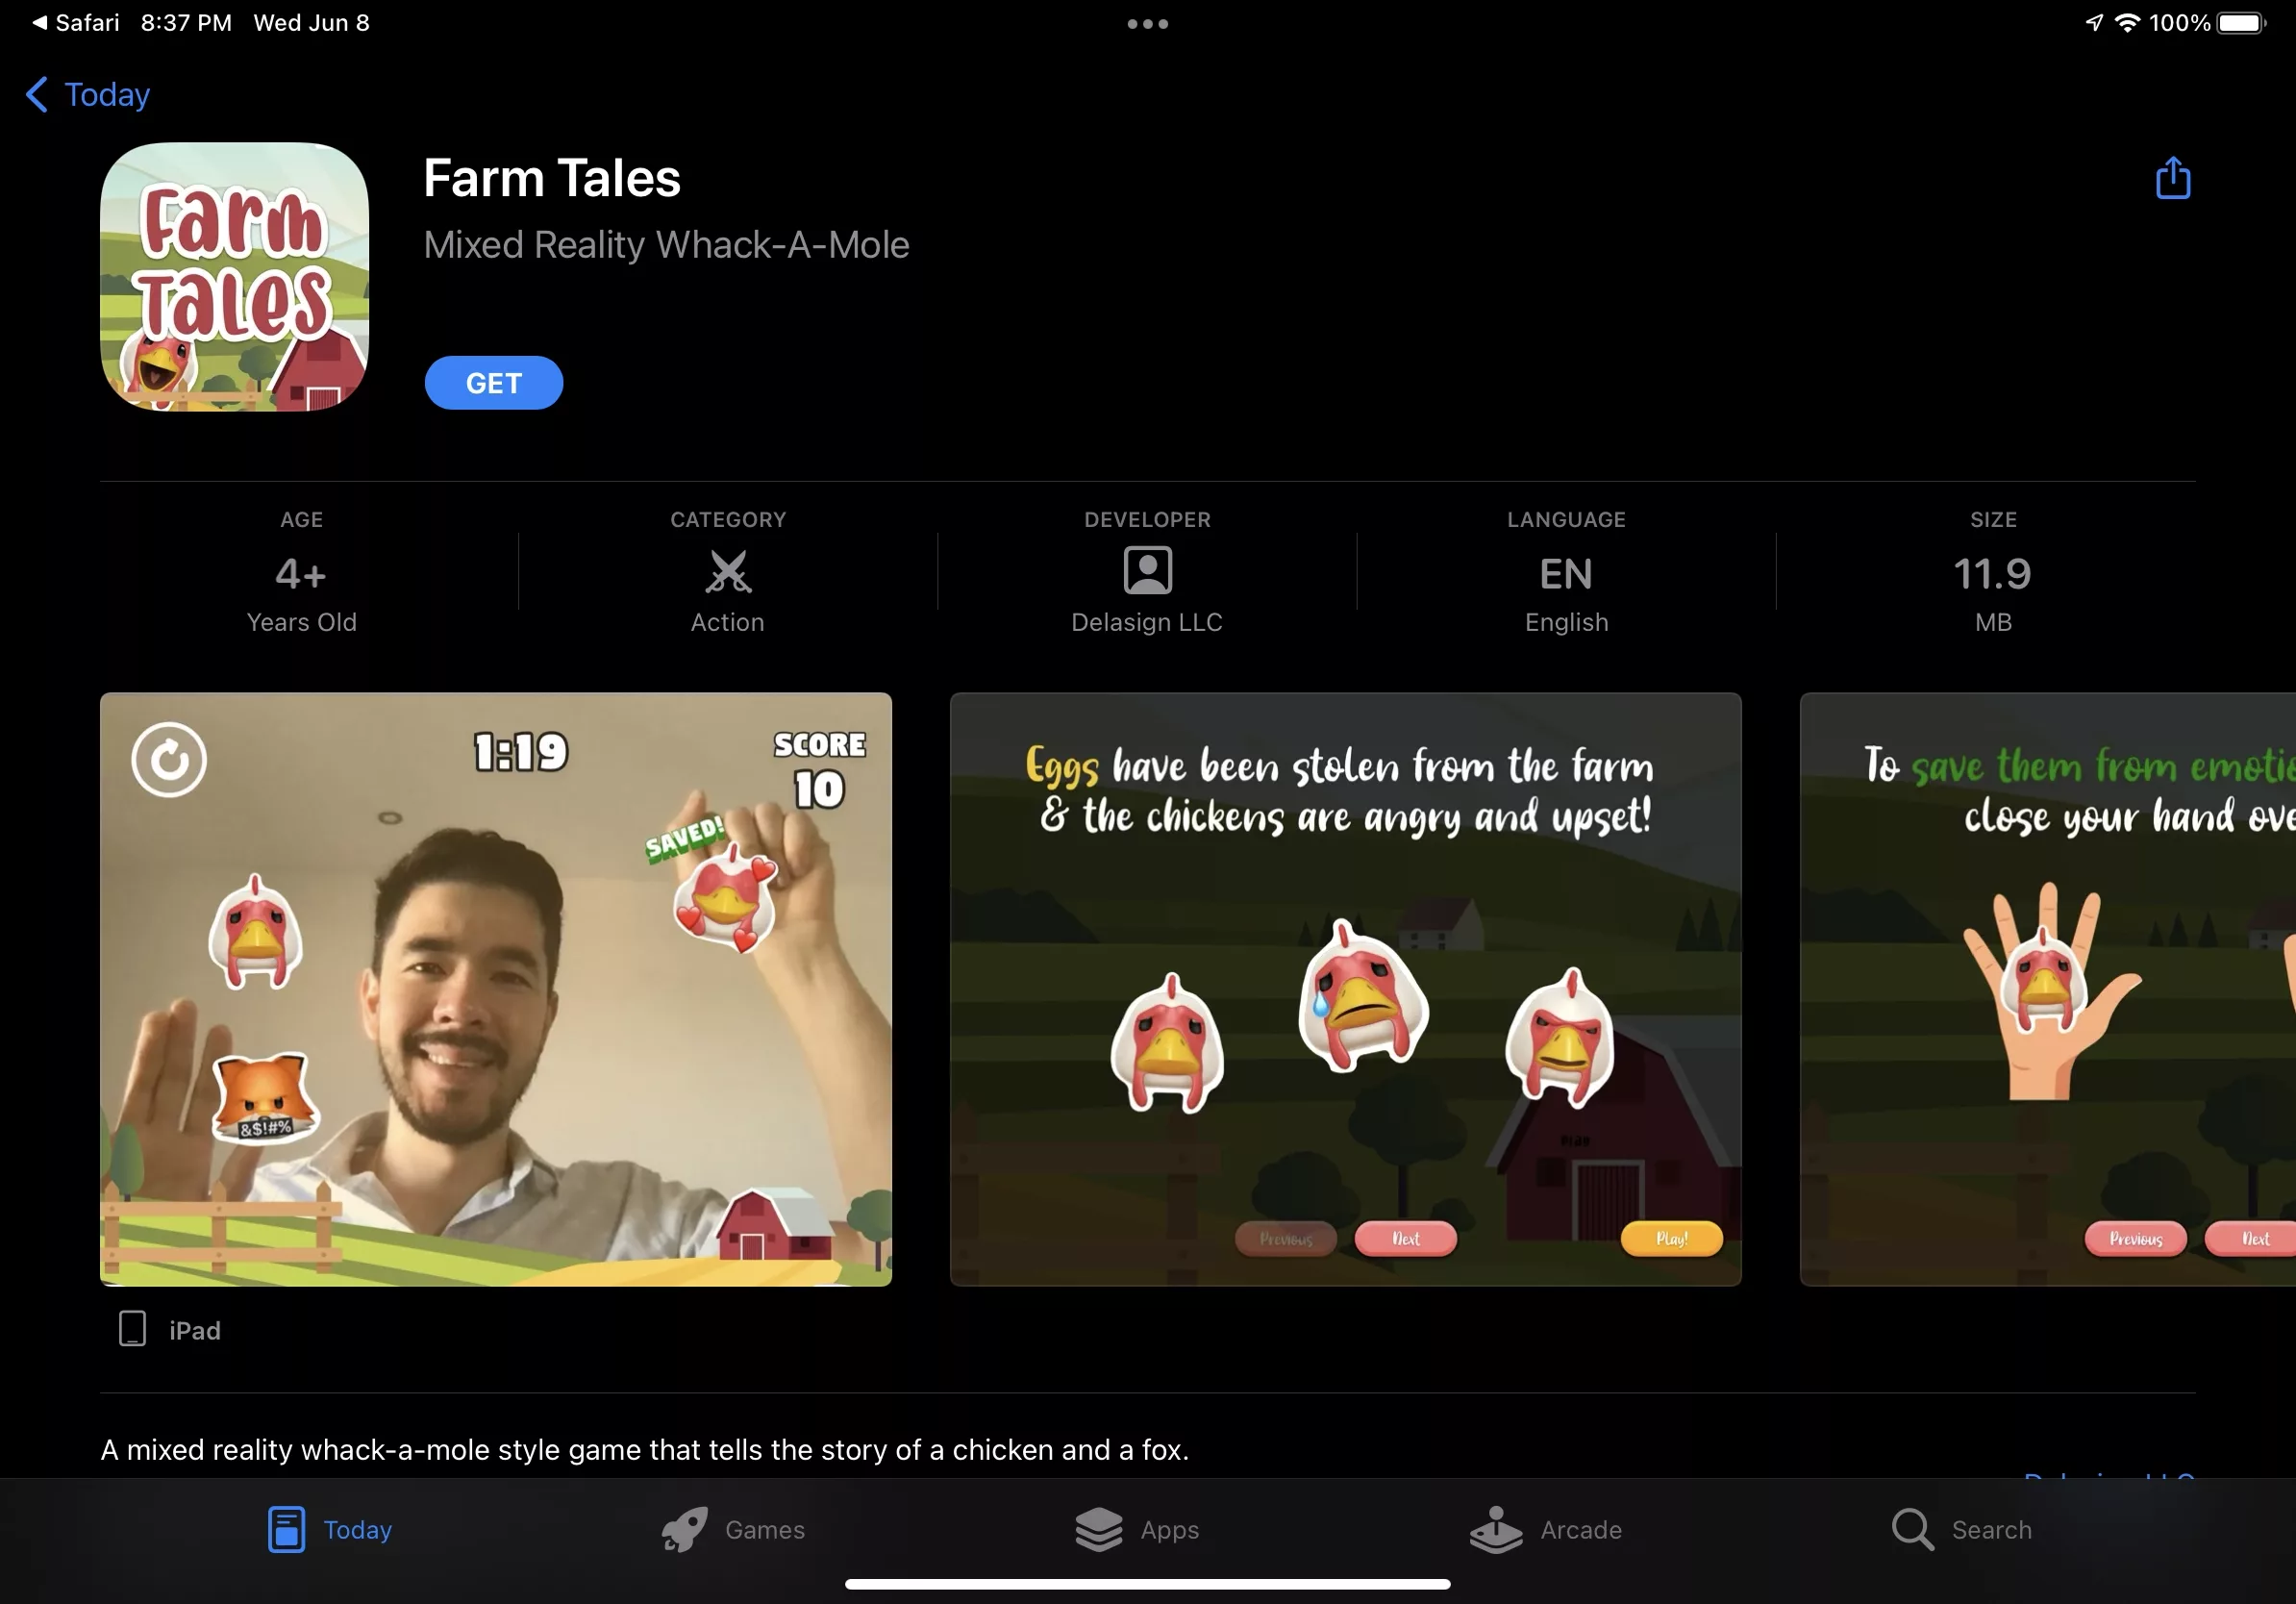 Farm Tales is available on iPad at the Apple App Store